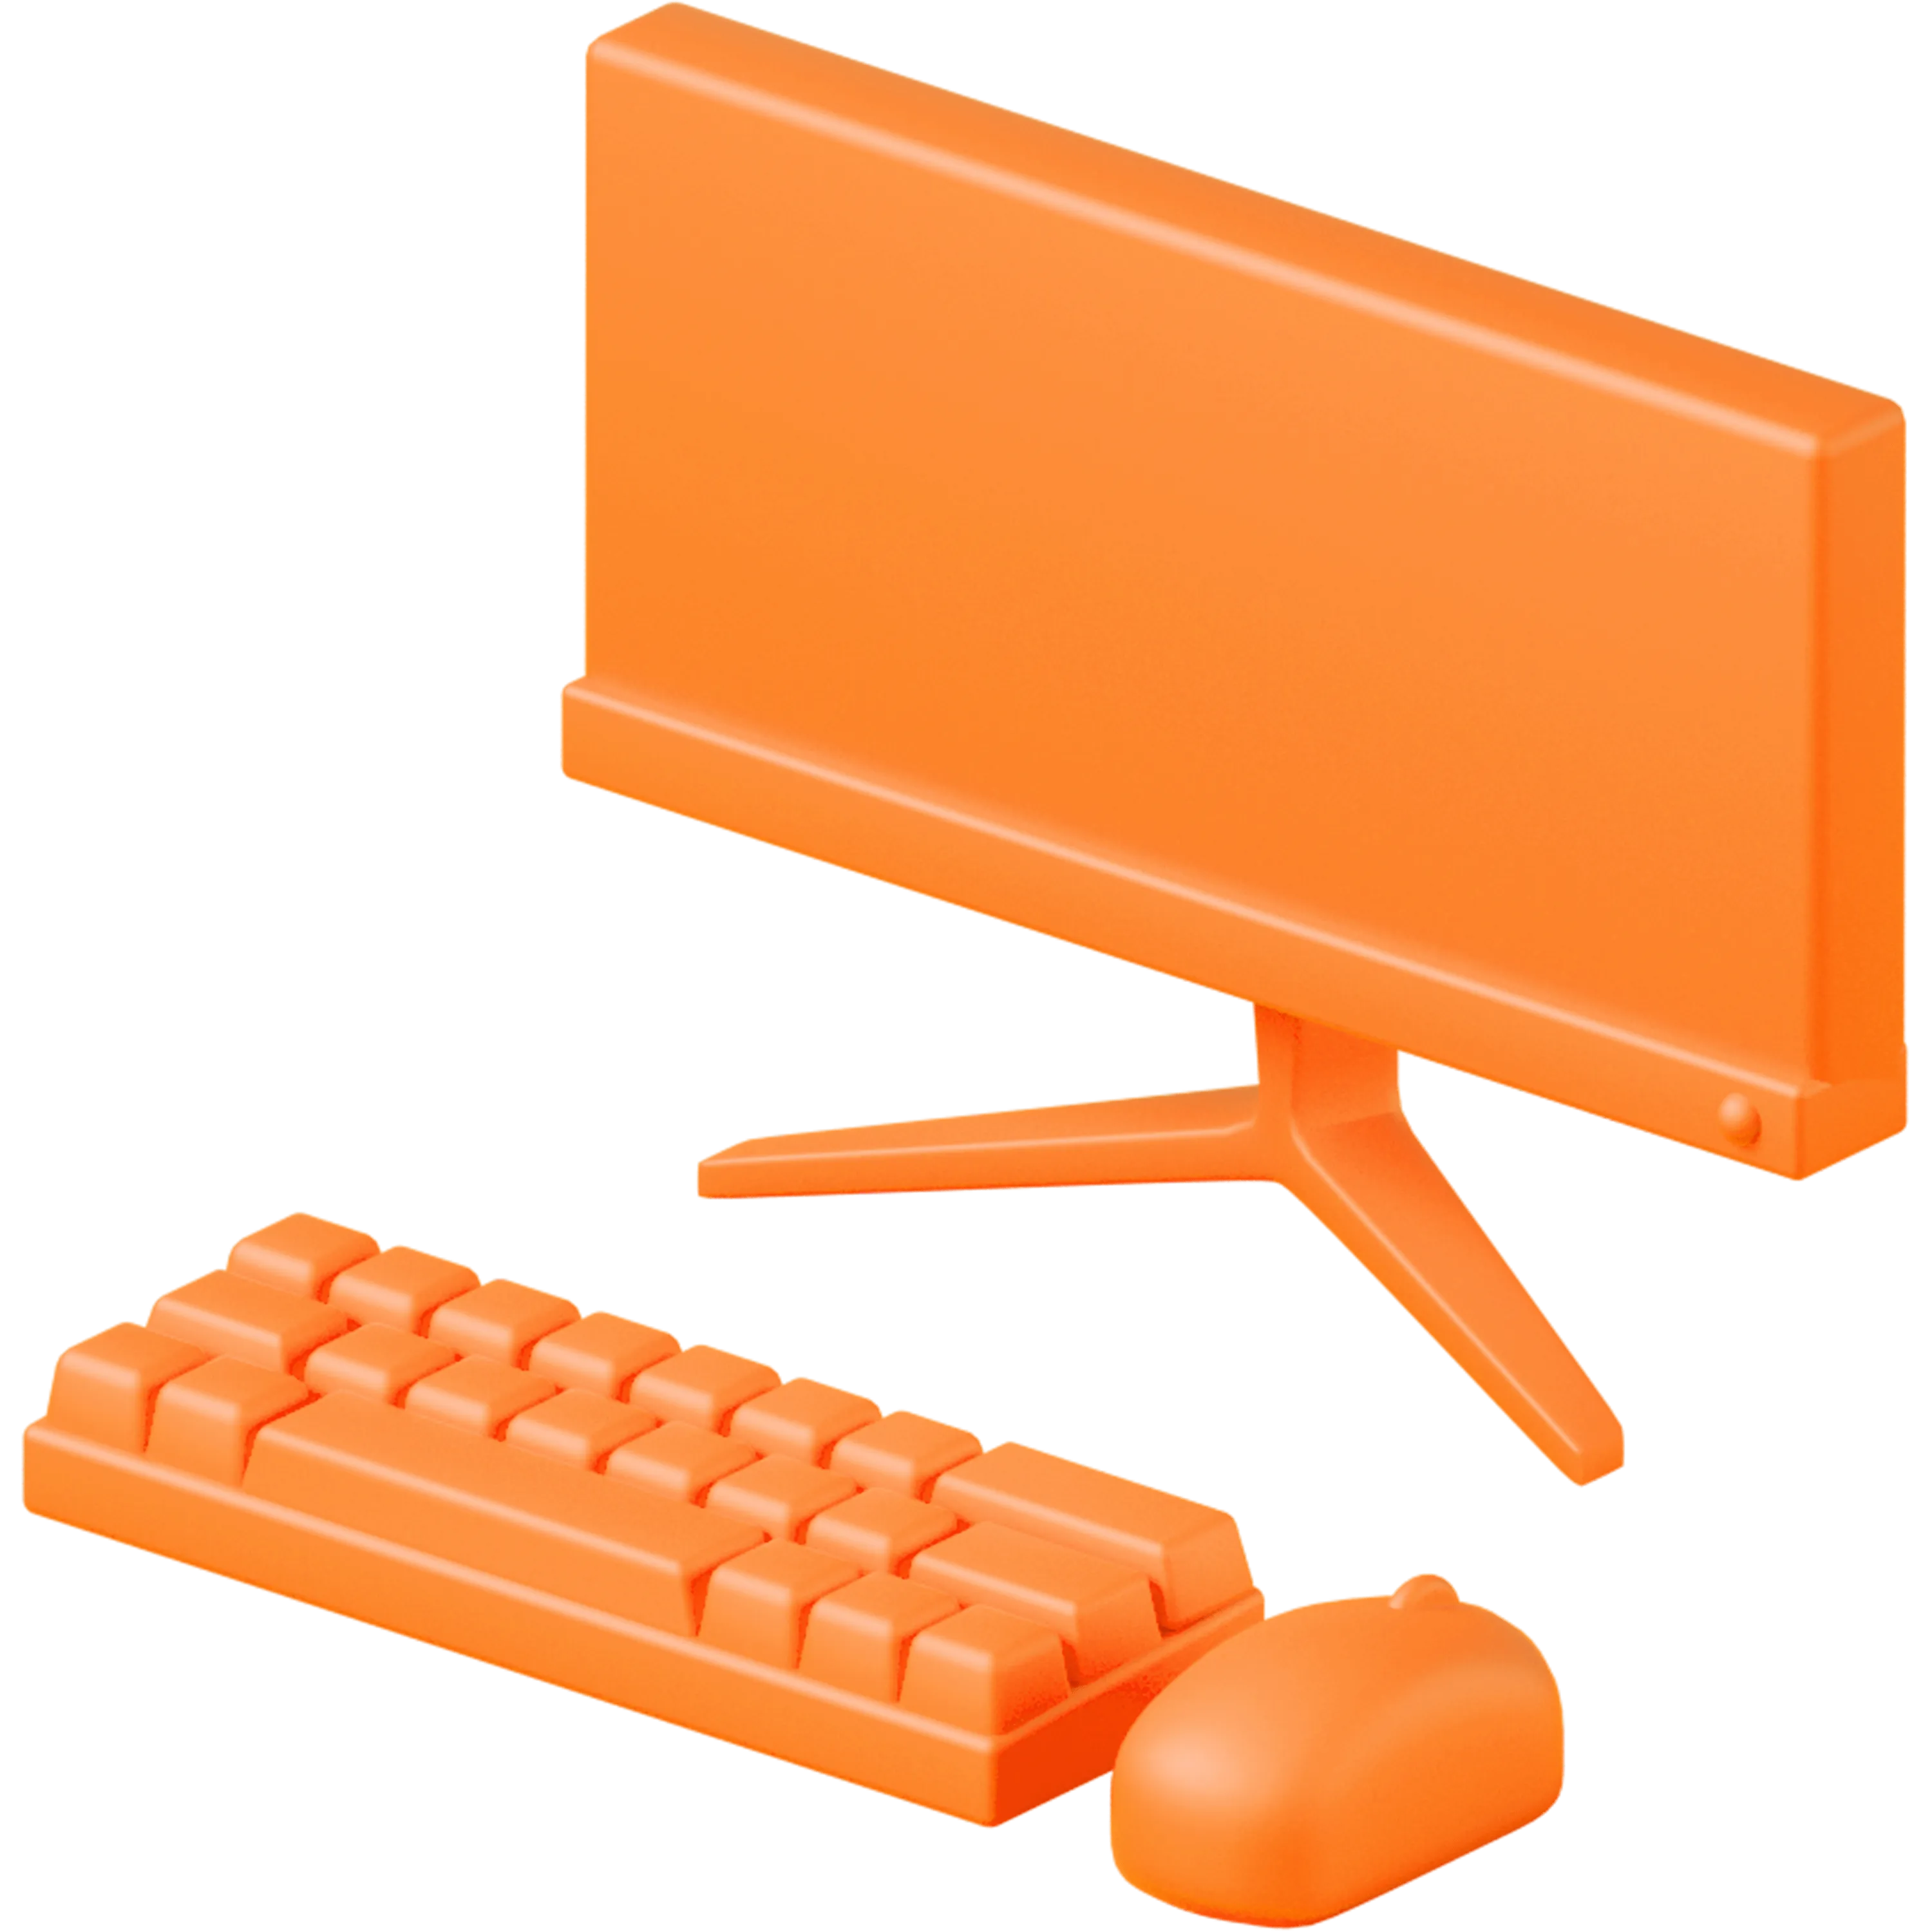 a 3d image of a computer monitor with a keyboard and mouse